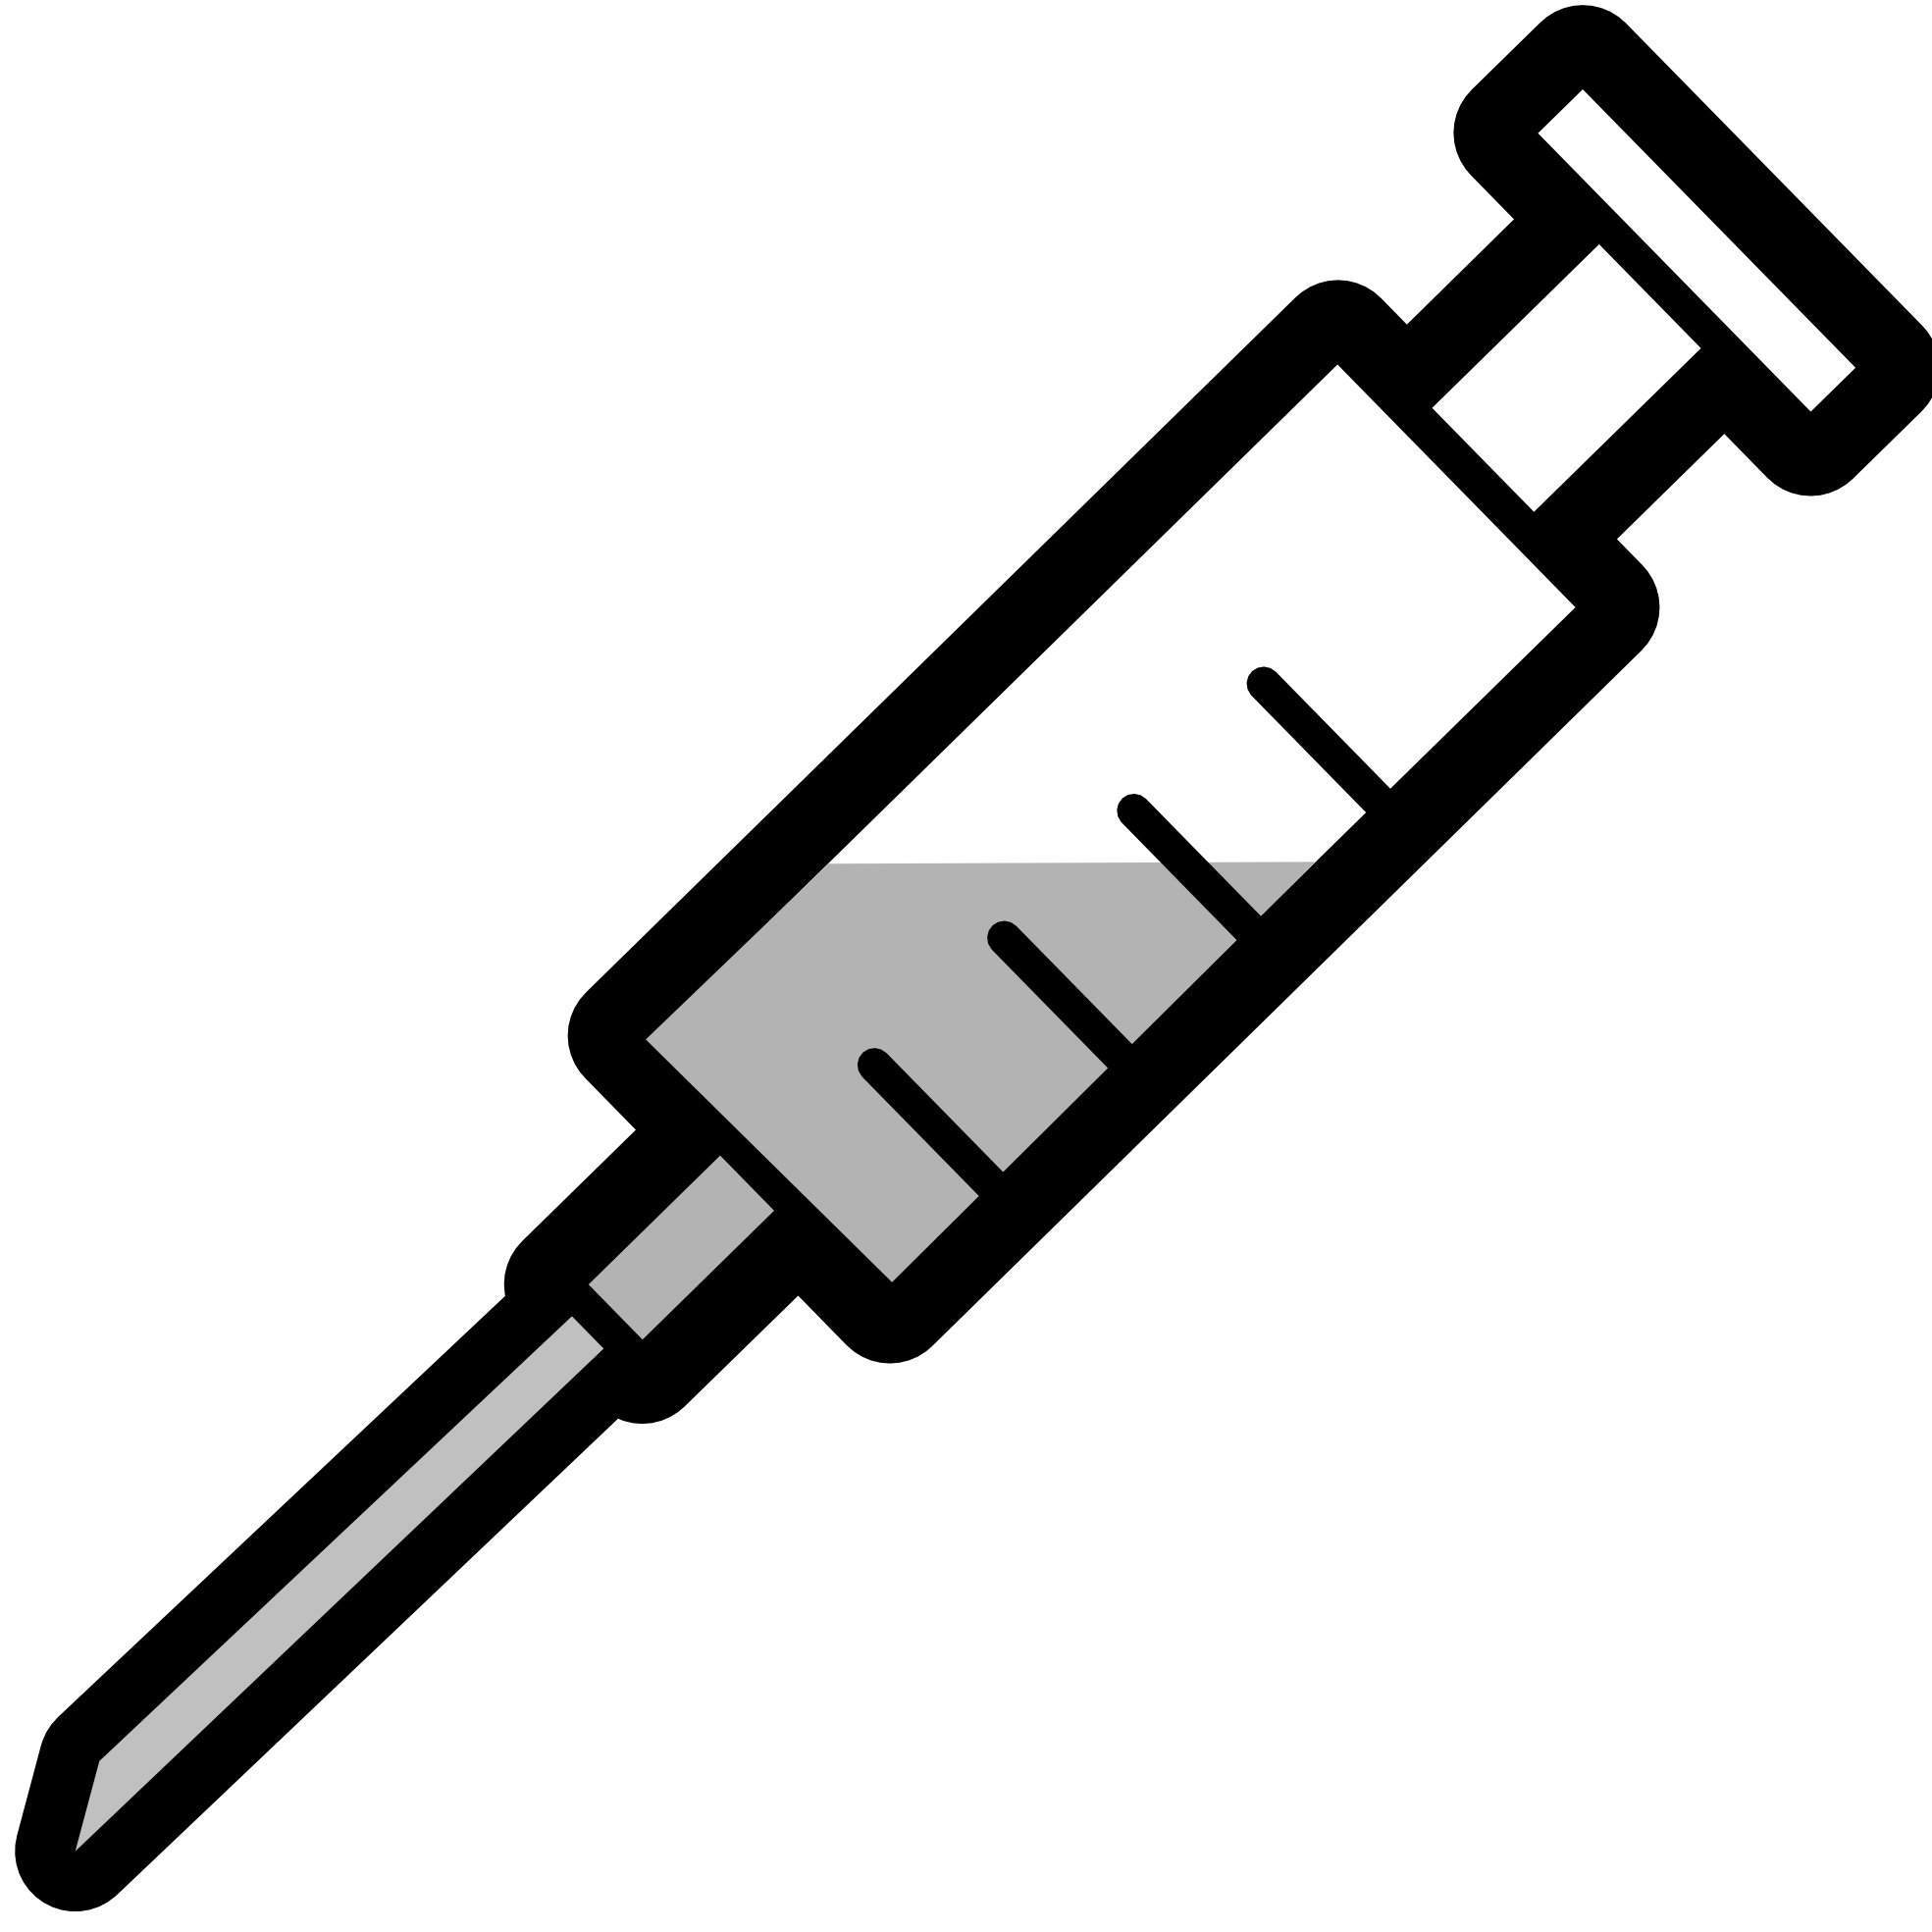 Syringe clip art | Clipart library - Free Clipart Images